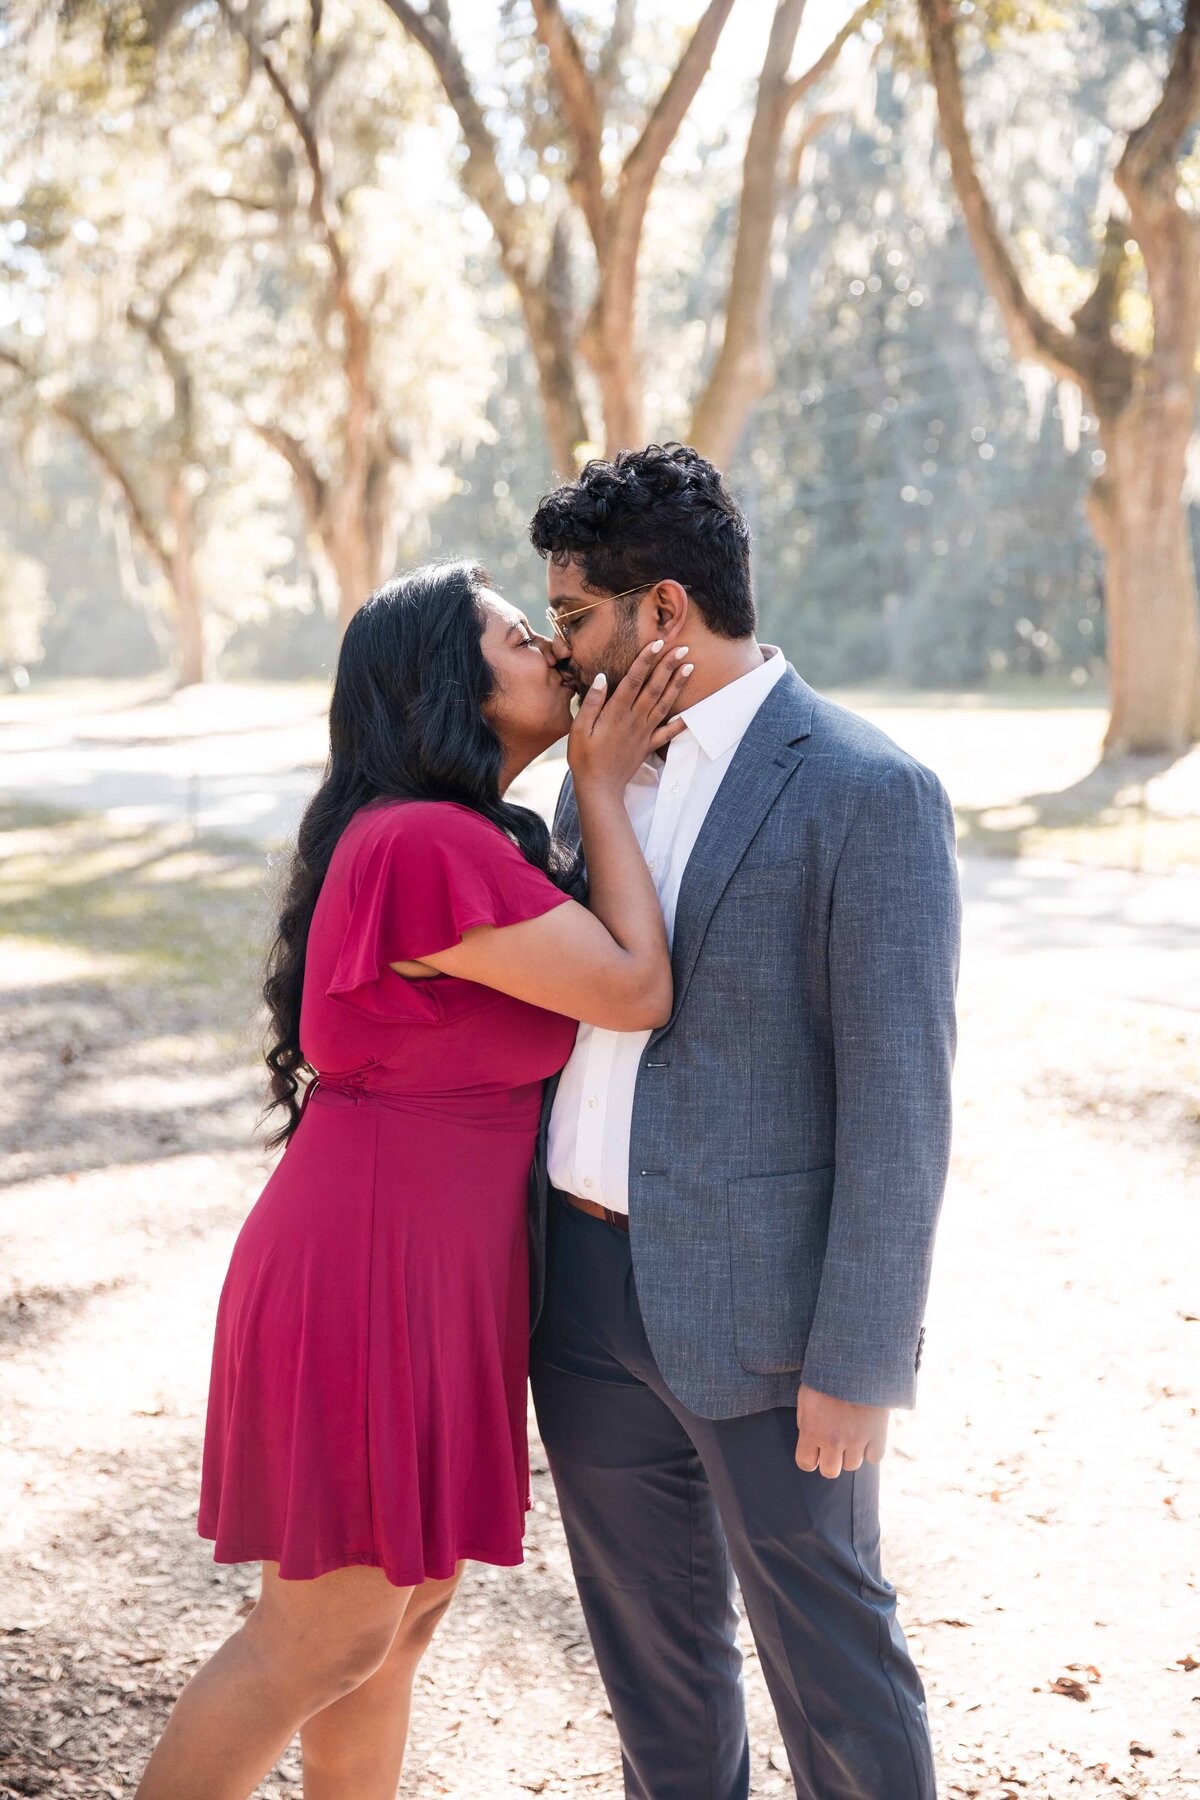 Engagement Photos at Wormsloe Historic Site by Phavy Photography, Savannah proposal photographer